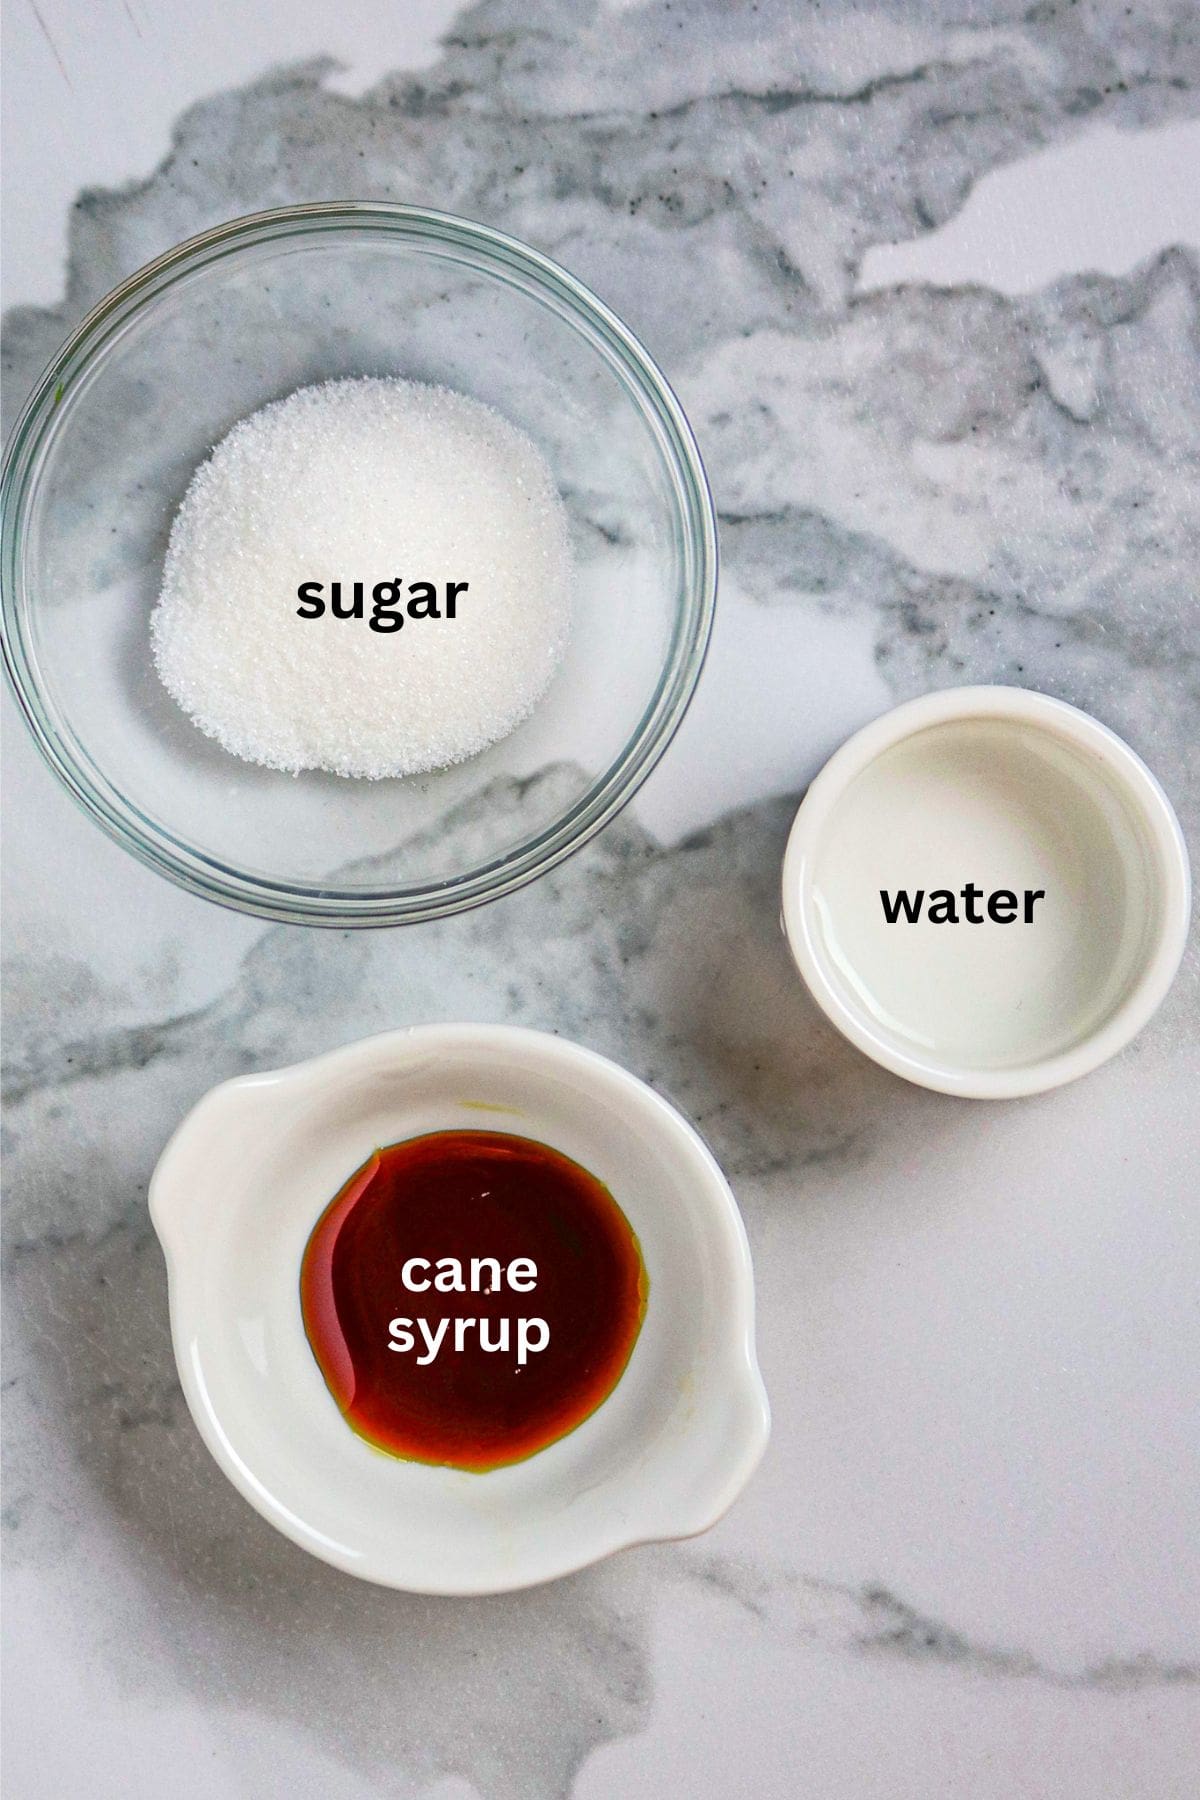 Ingredients of sugar, water, and cane syrup for a glaze.